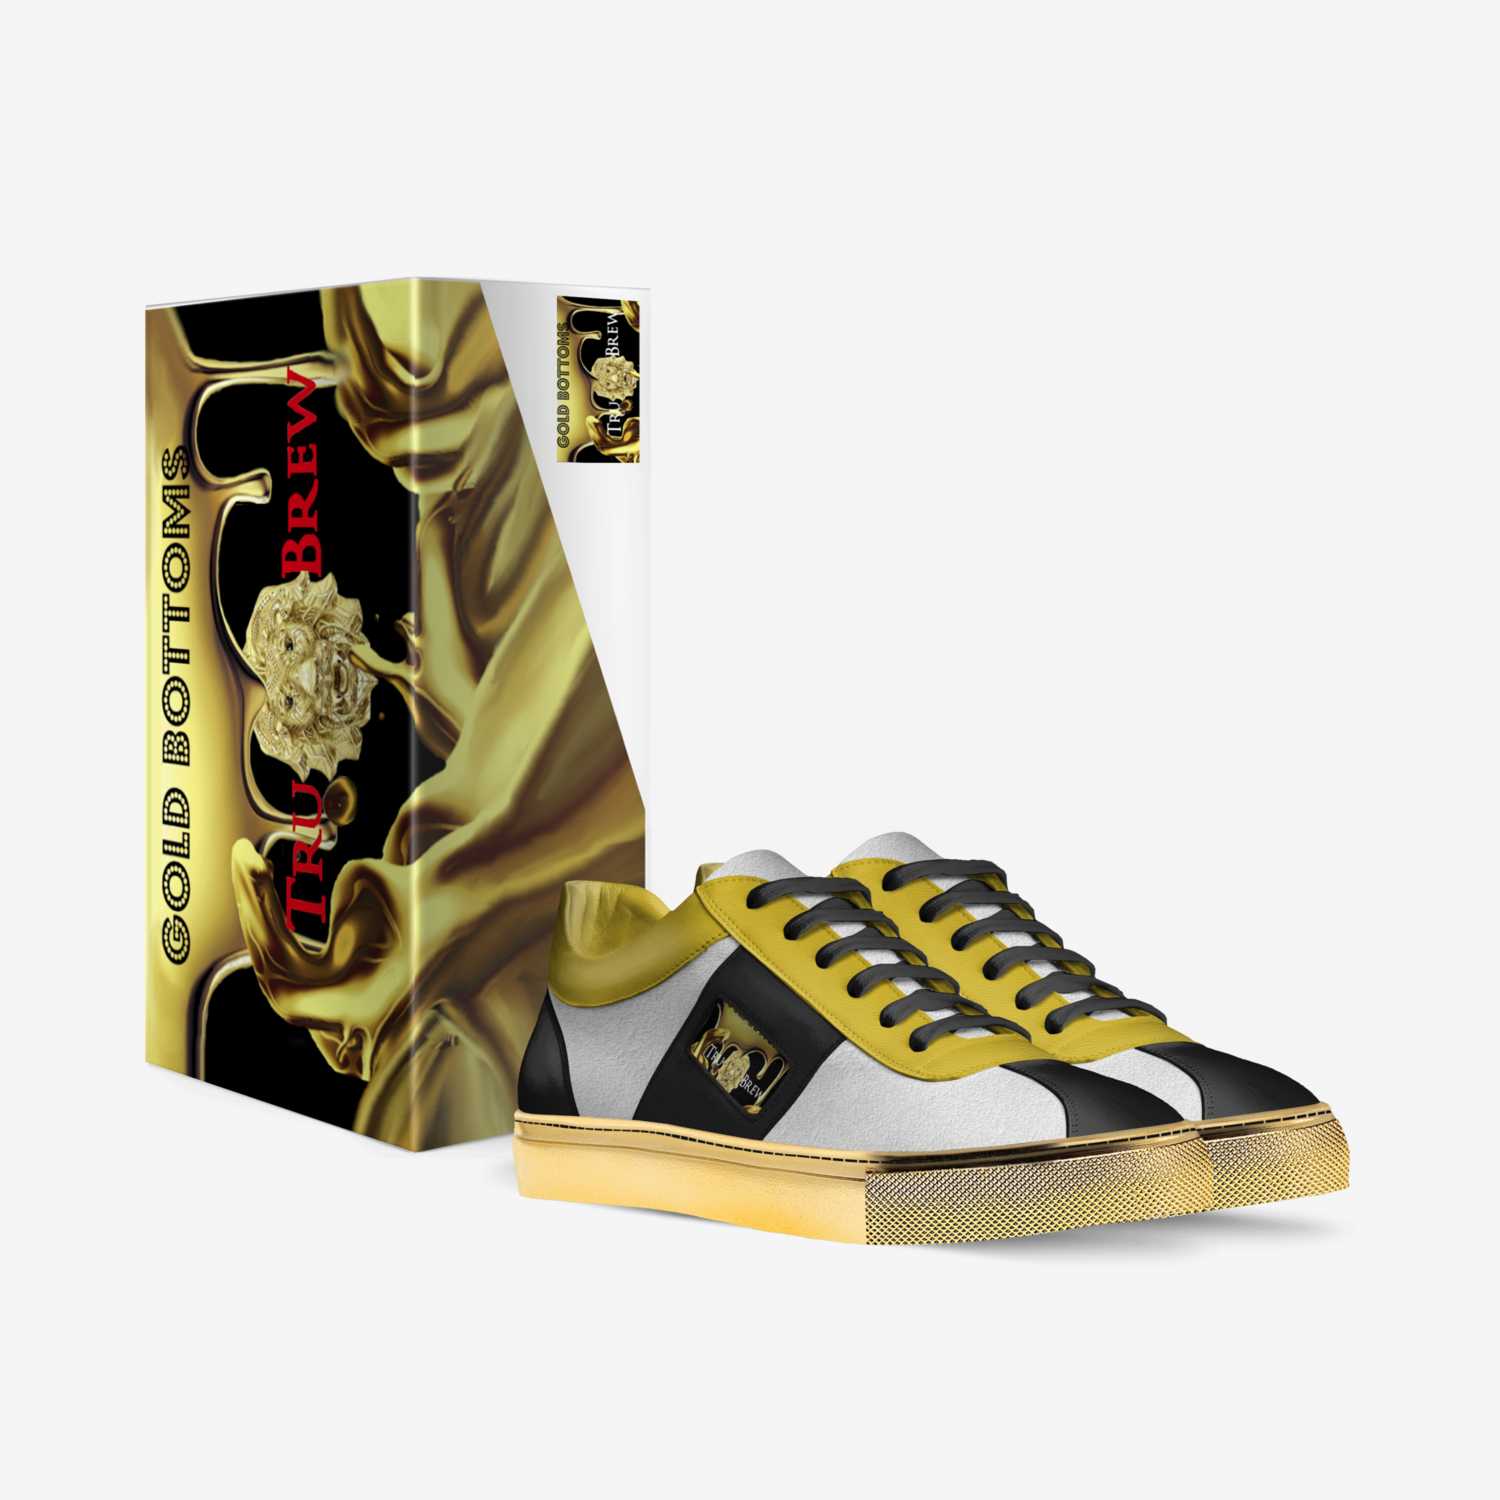 GOLD BOTTOM BREWS custom made in Italy shoes by Aundra Evans Oded | Box view